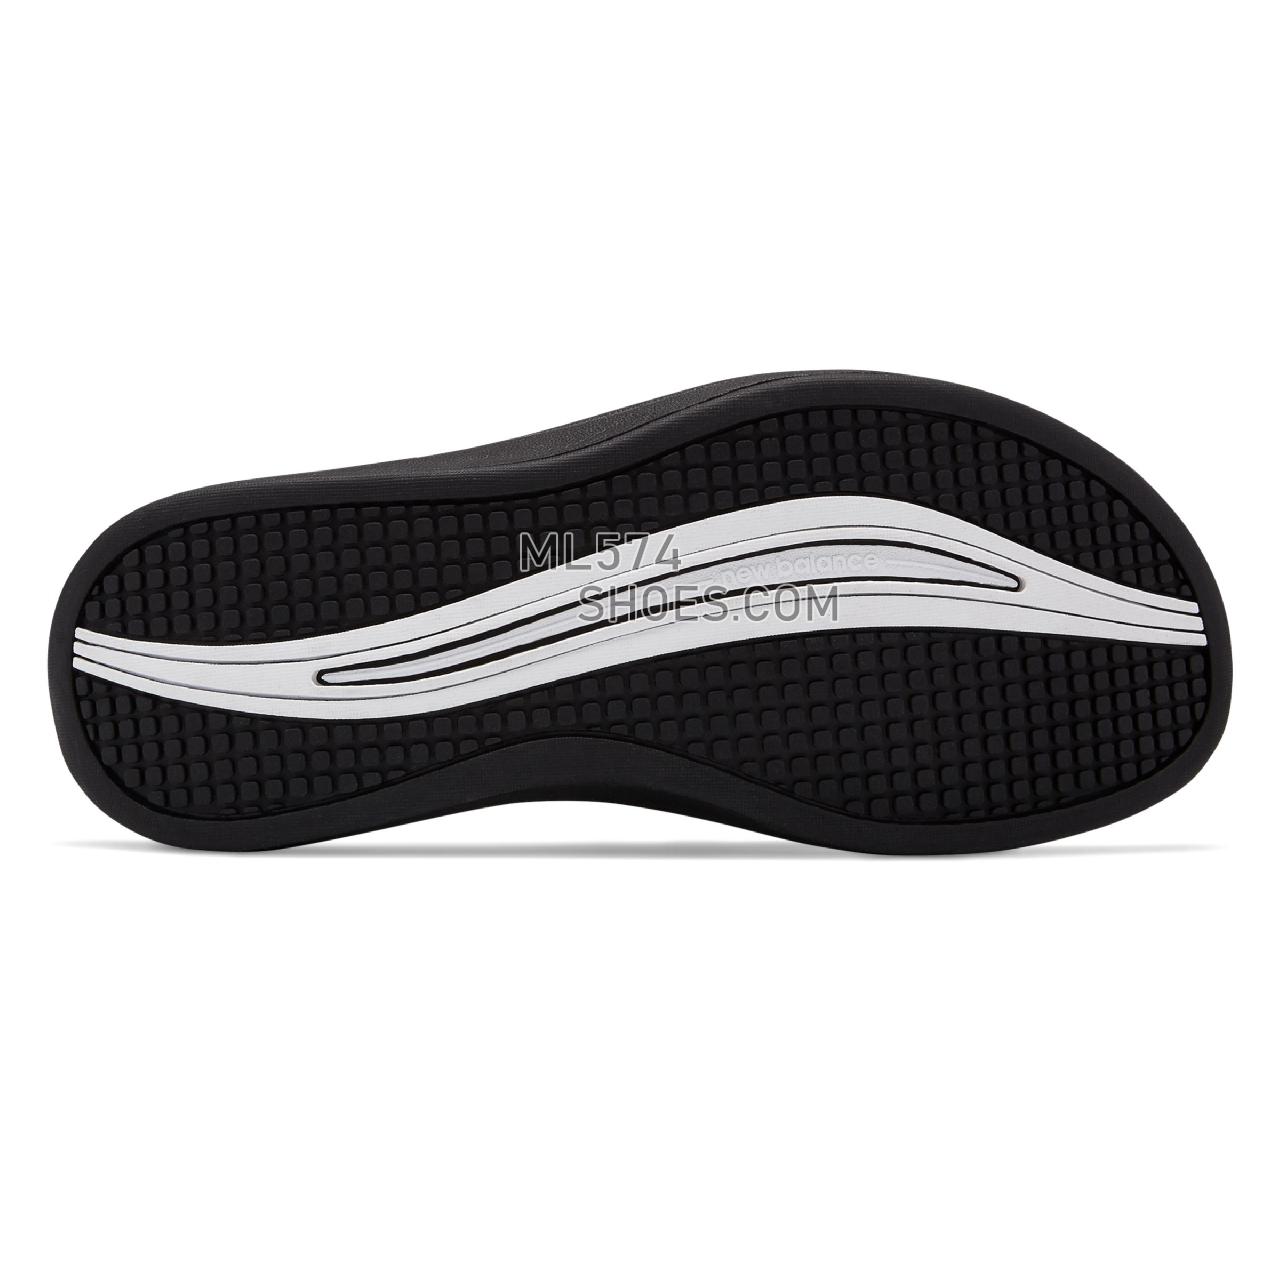 New Balance Revive Sport Thong - Women's 6087 - Sandals Black with White - W6087MLT